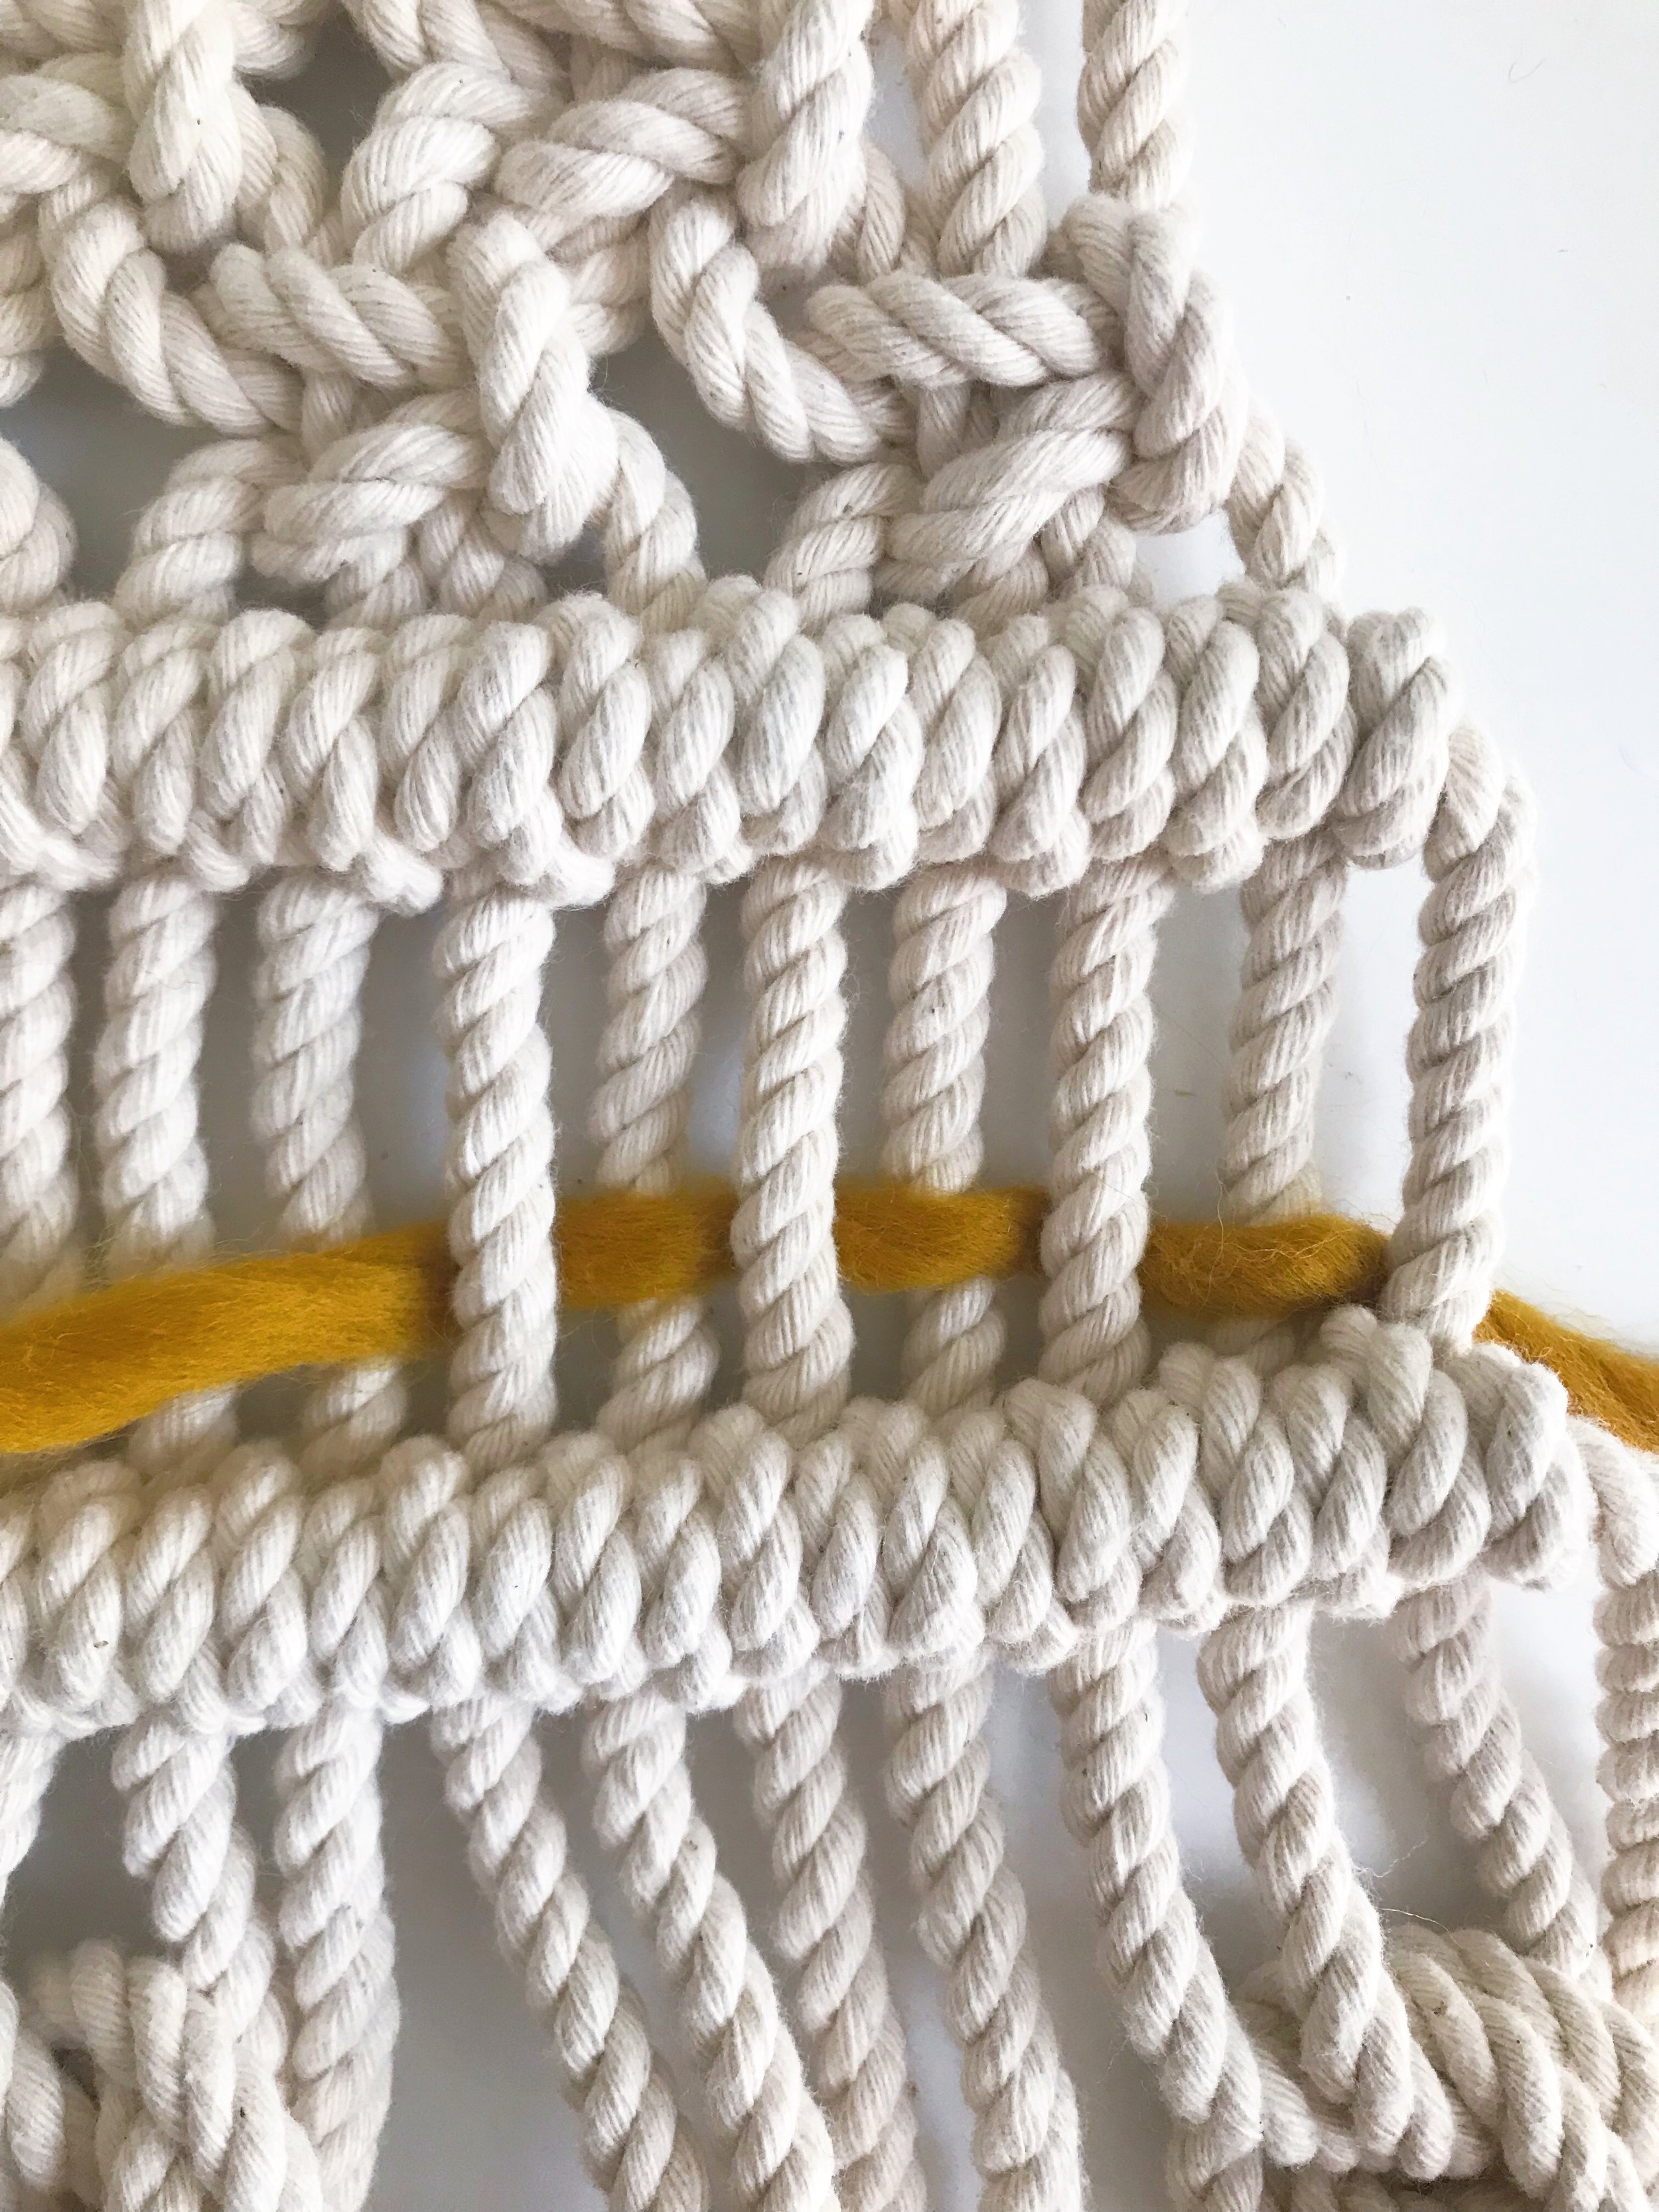 Wool Roving - Perfect for Macra-Weave! Mustard by Modern Macramé